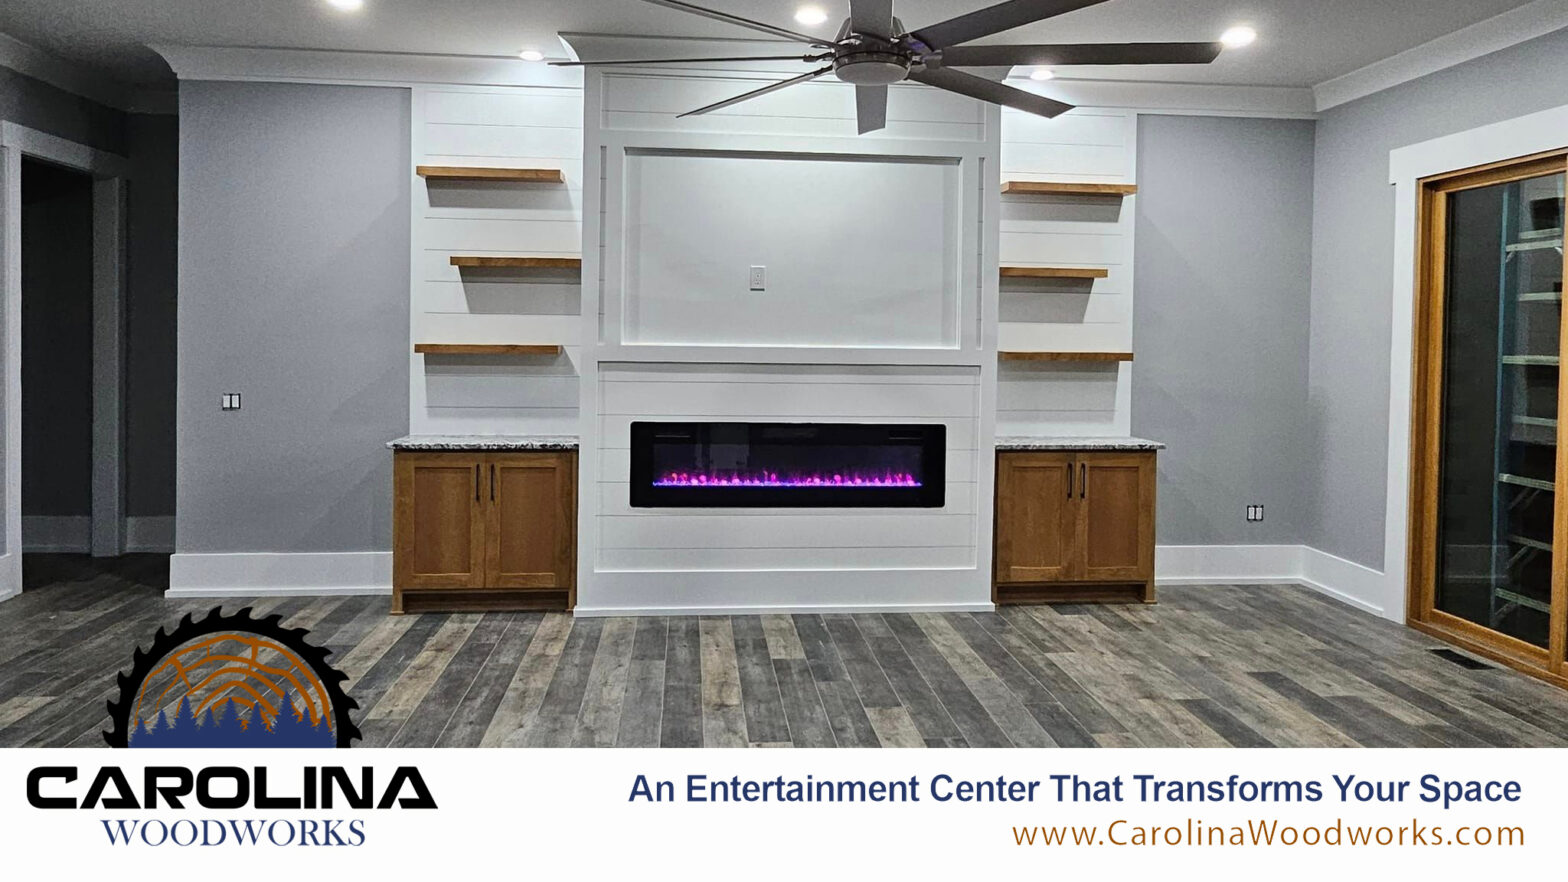 An Entertainment Center That Transforms Your Space